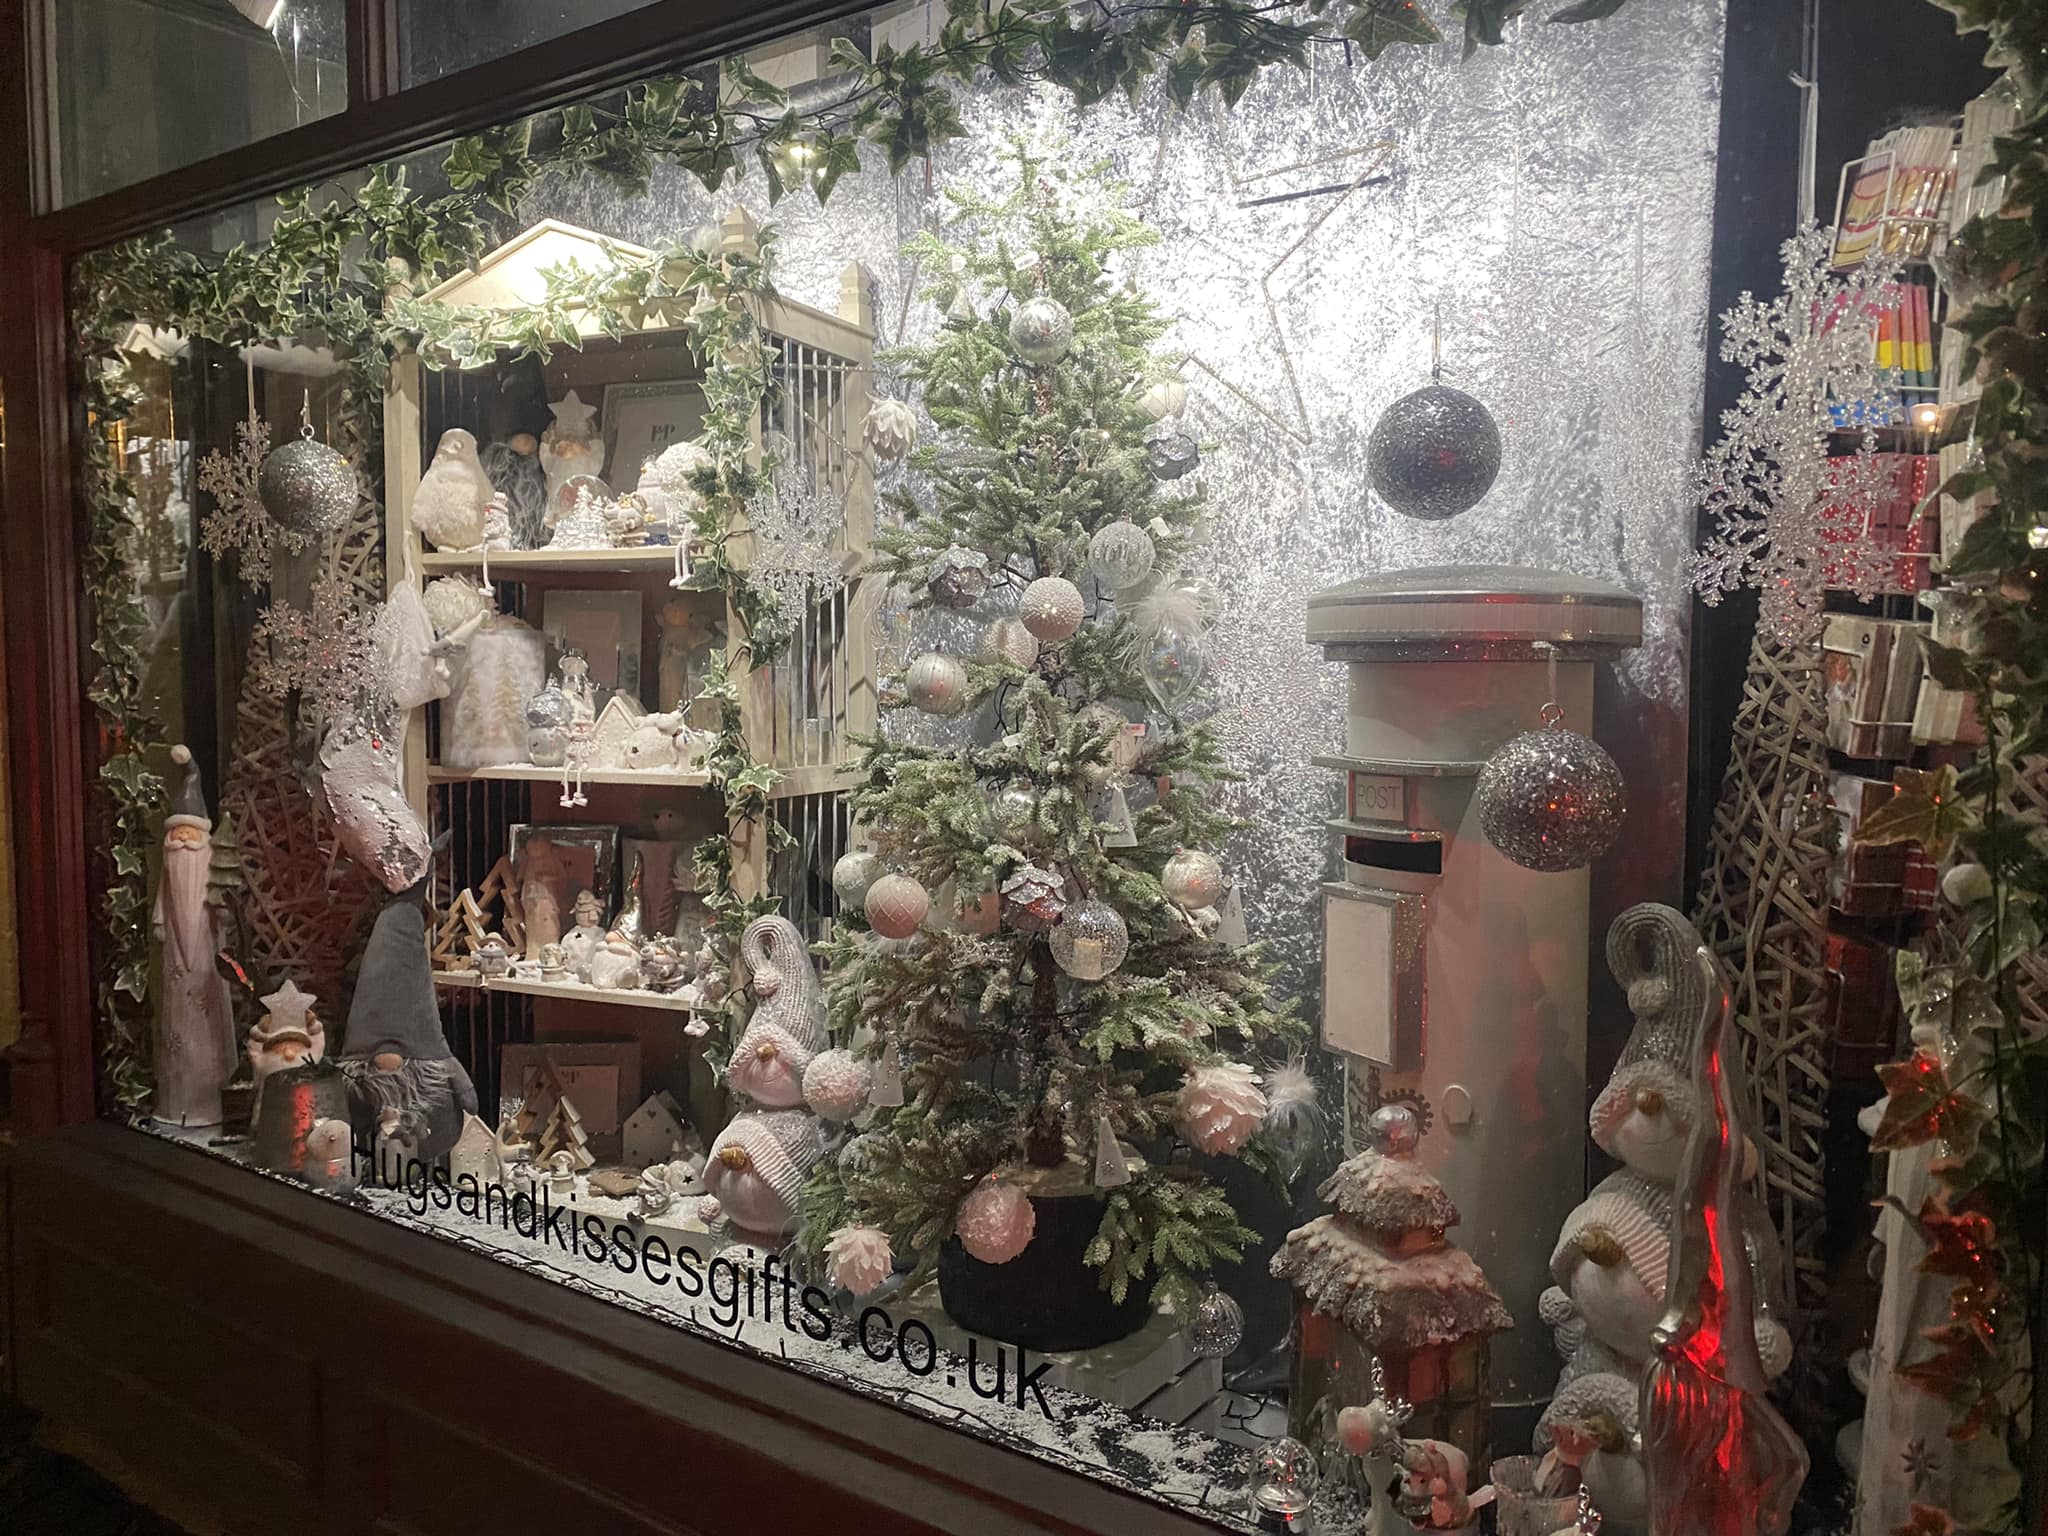 Above: The Christmas window in Hugs & Kisses in Tettenhall